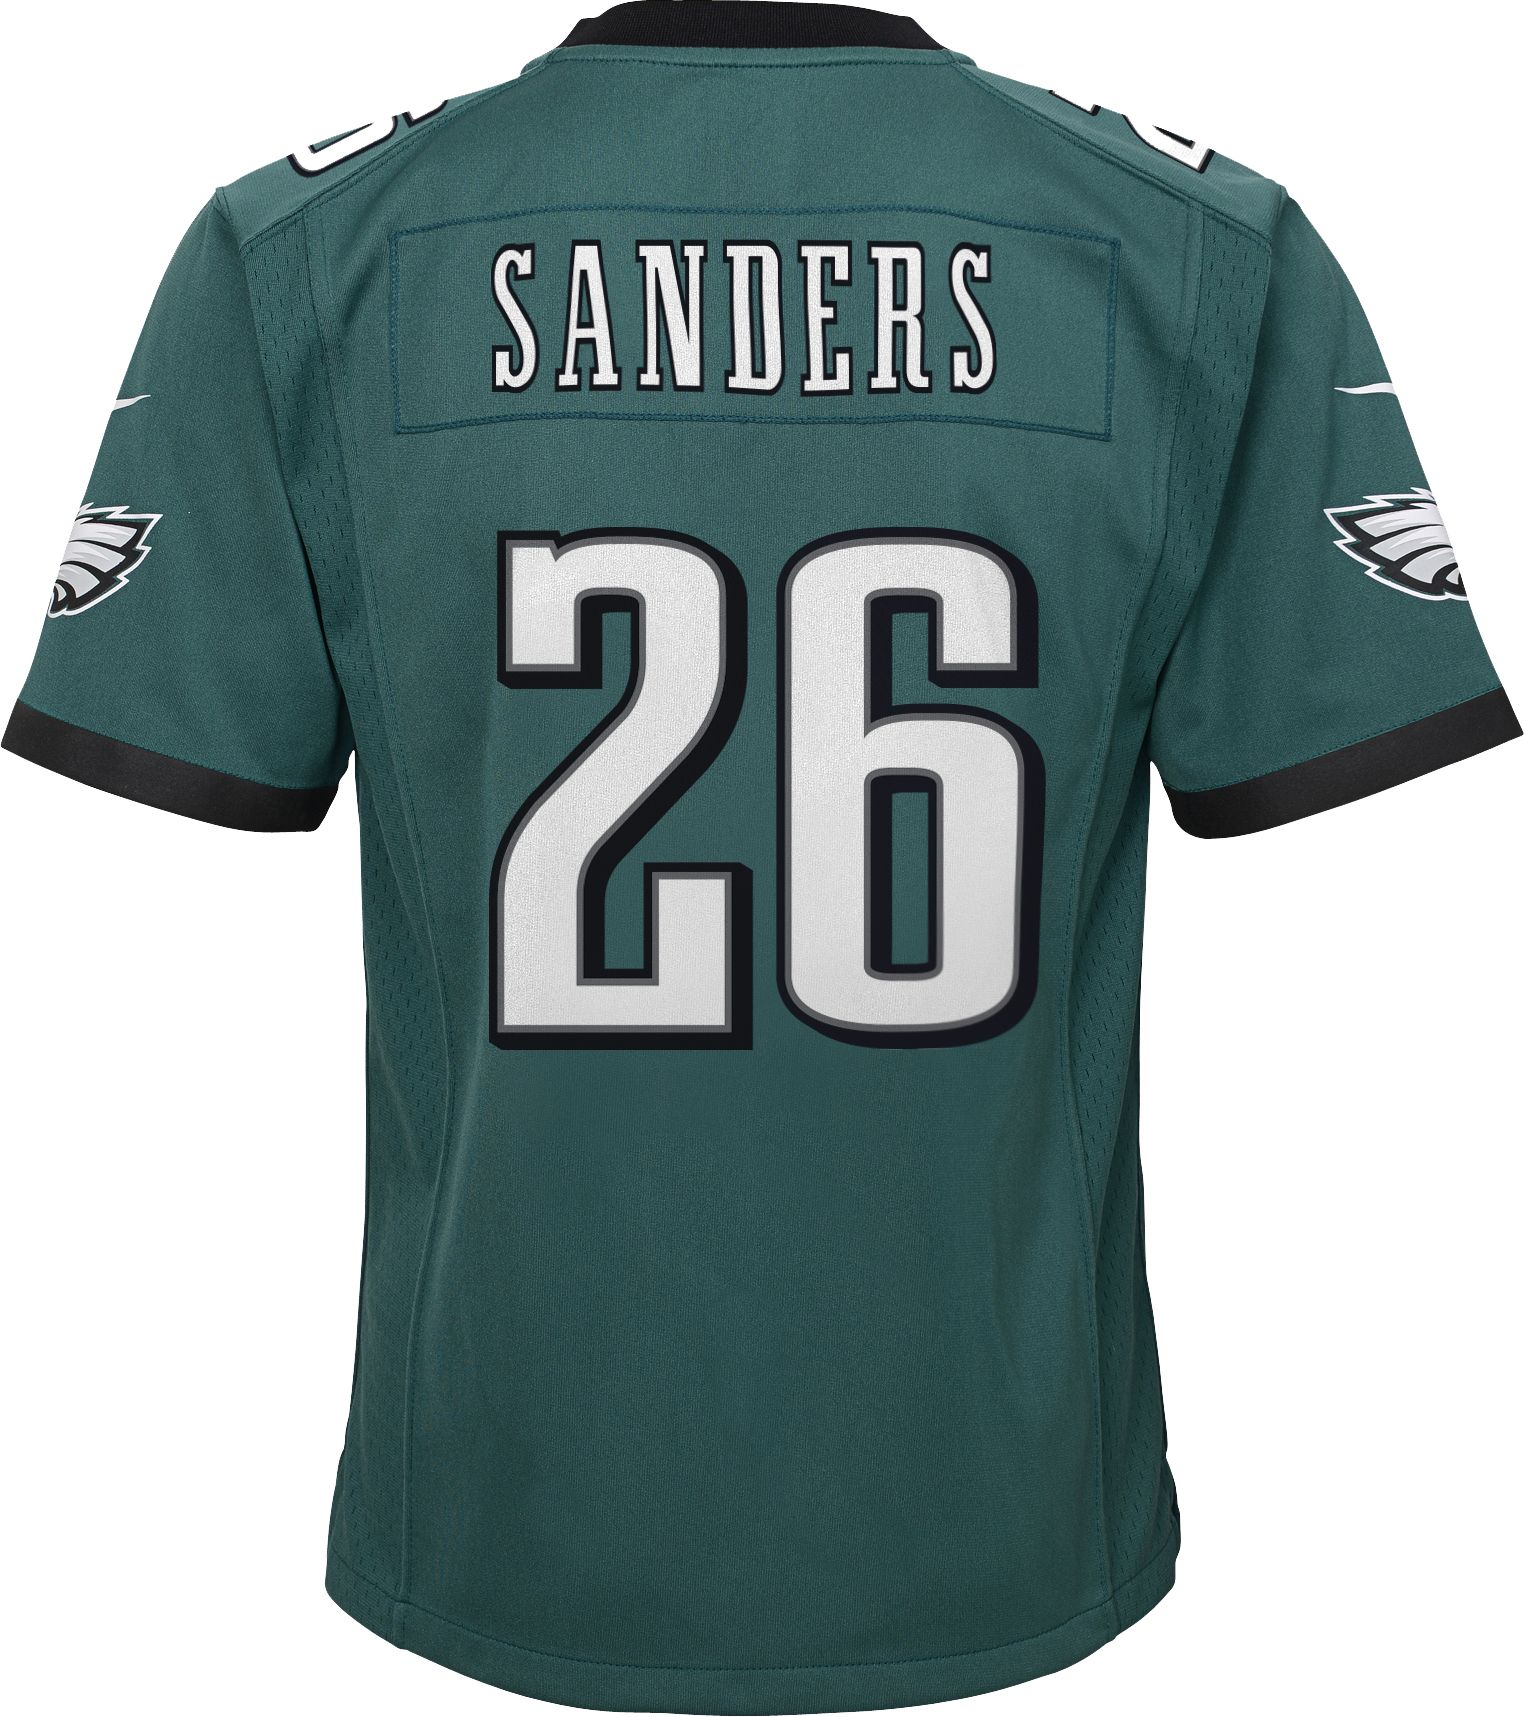 youth miles sanders jersey